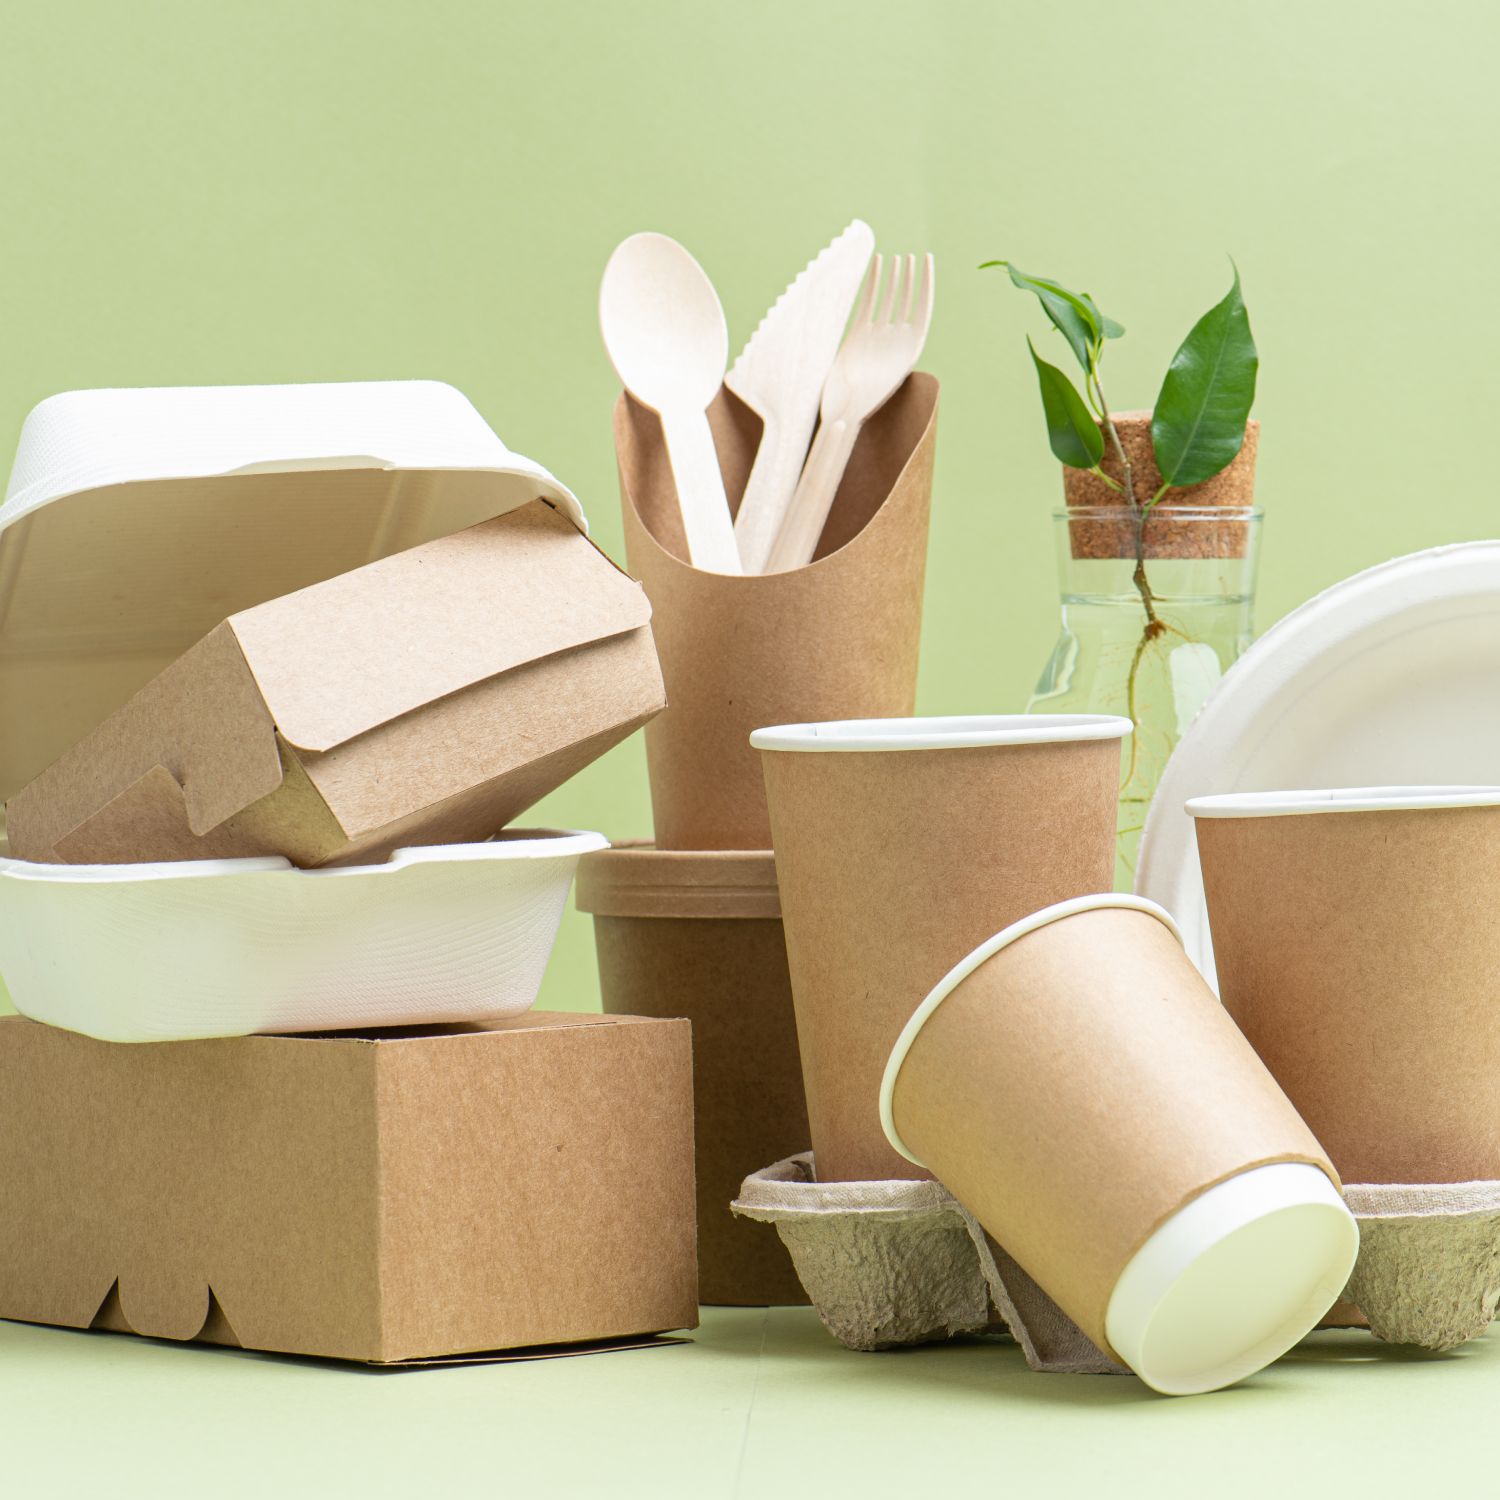 A collection of compostable goods, including food packaging items, coffee cups, and cutlery alongside a small plant.